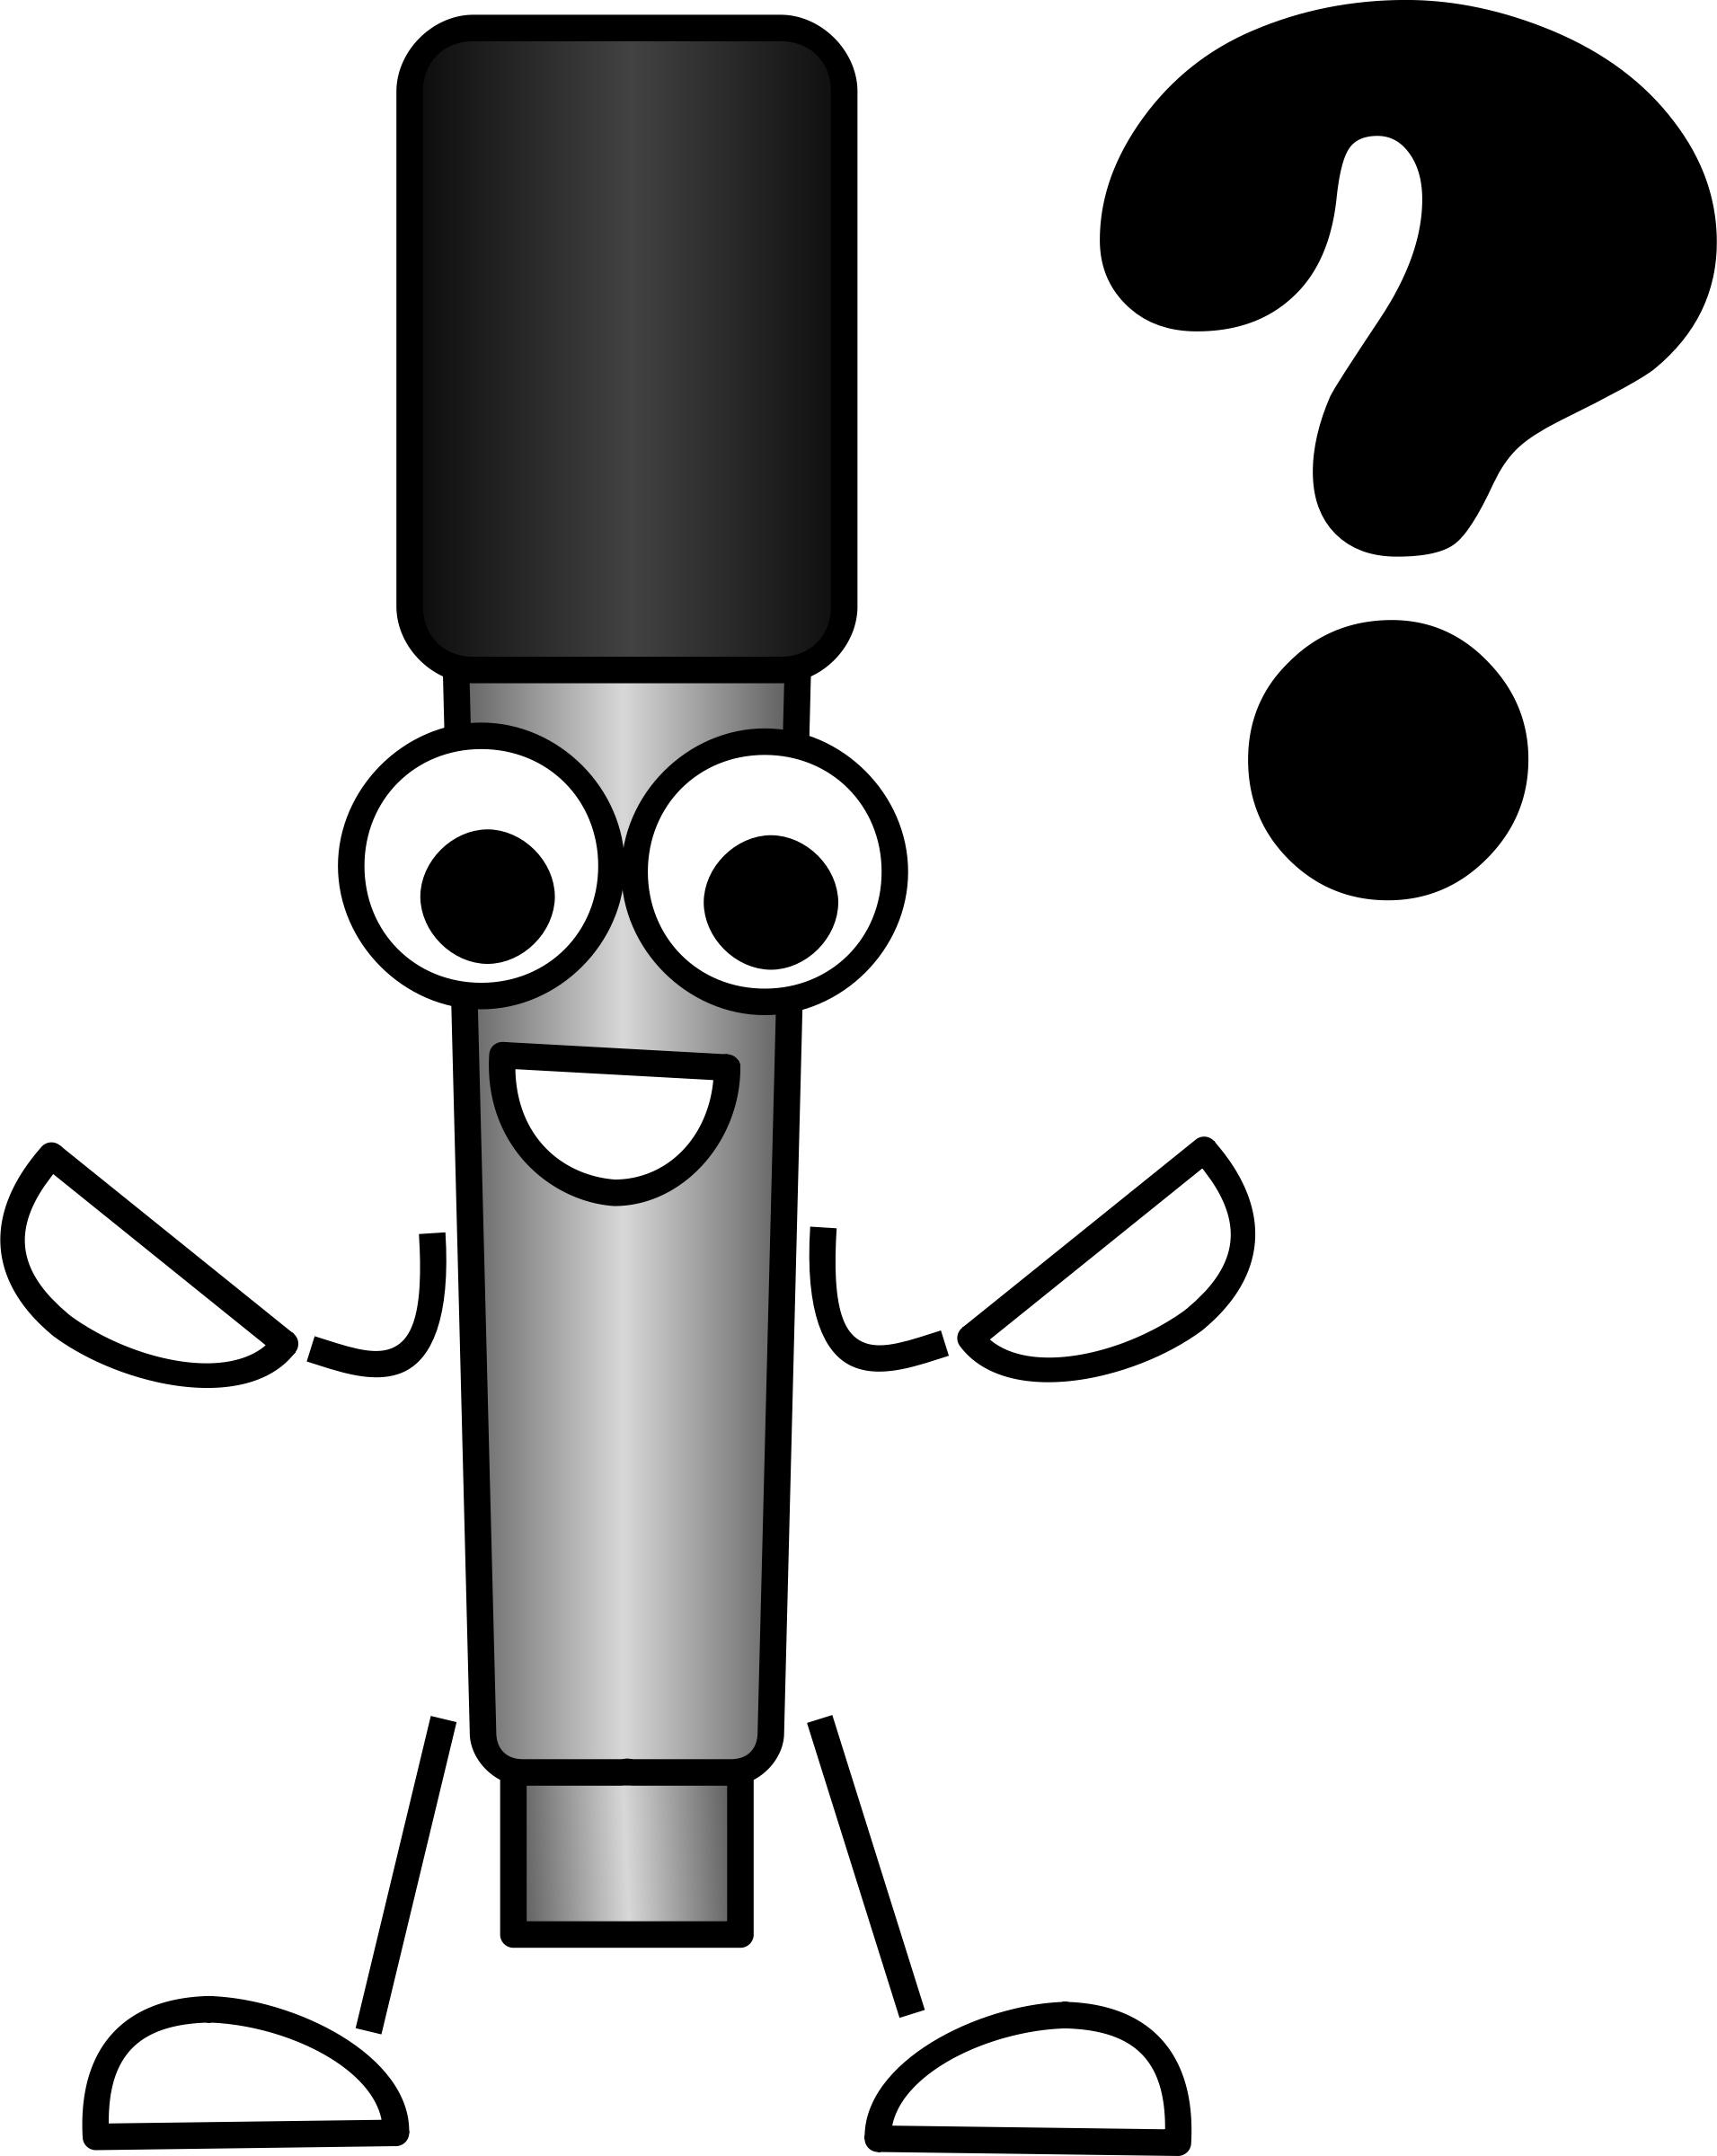 Mike the Mic Question PNG icons